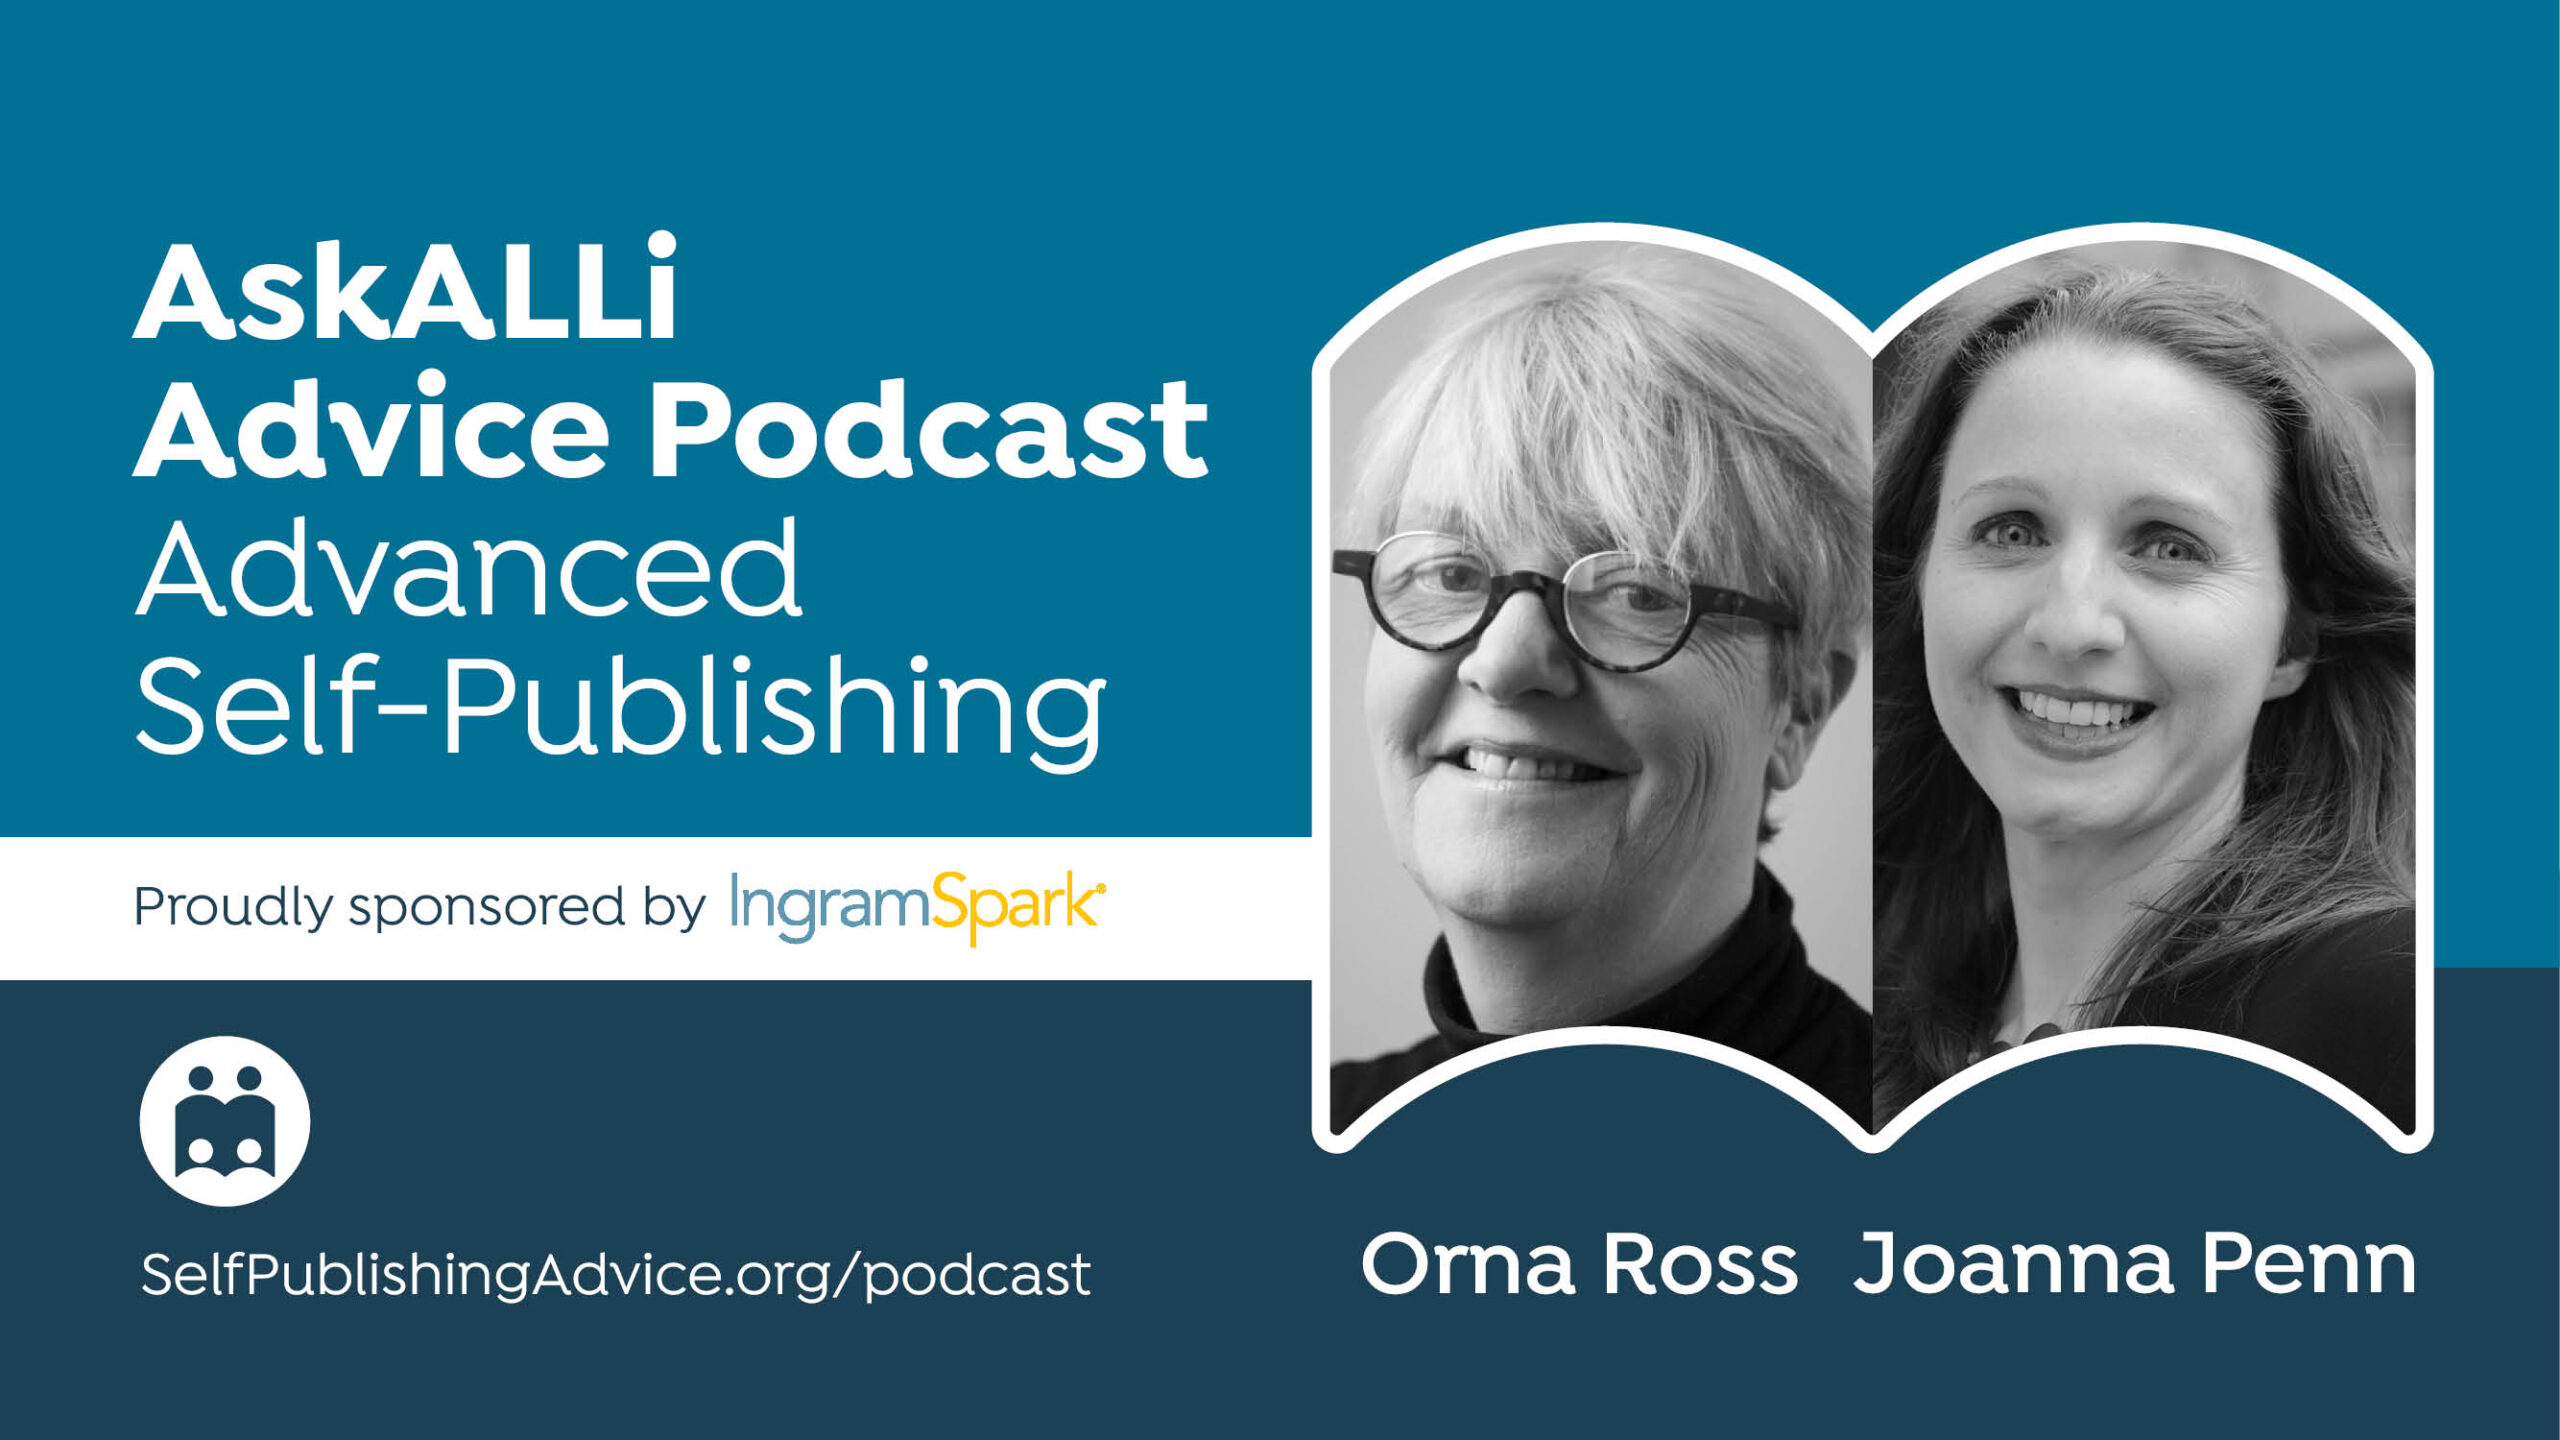 New Opportunities And Technologies For Authors: Advanced Self-Publishing Podcast With Orna Ross And Joanna Penn